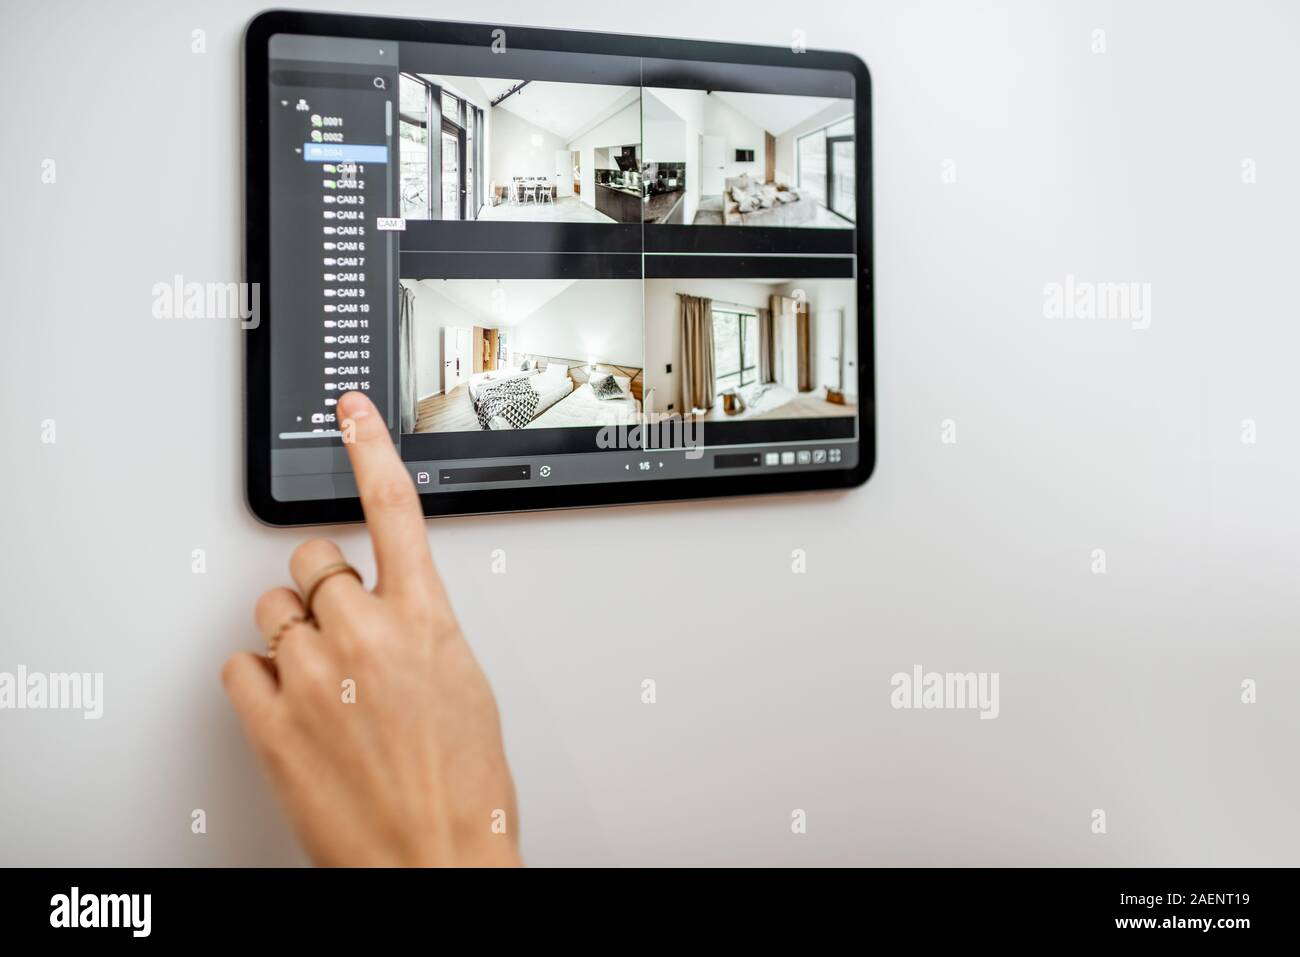 Controlling home with video cameras and digital tablet. Concept of remote video surveillance over the internet with smart touch screen devices Stock Photo